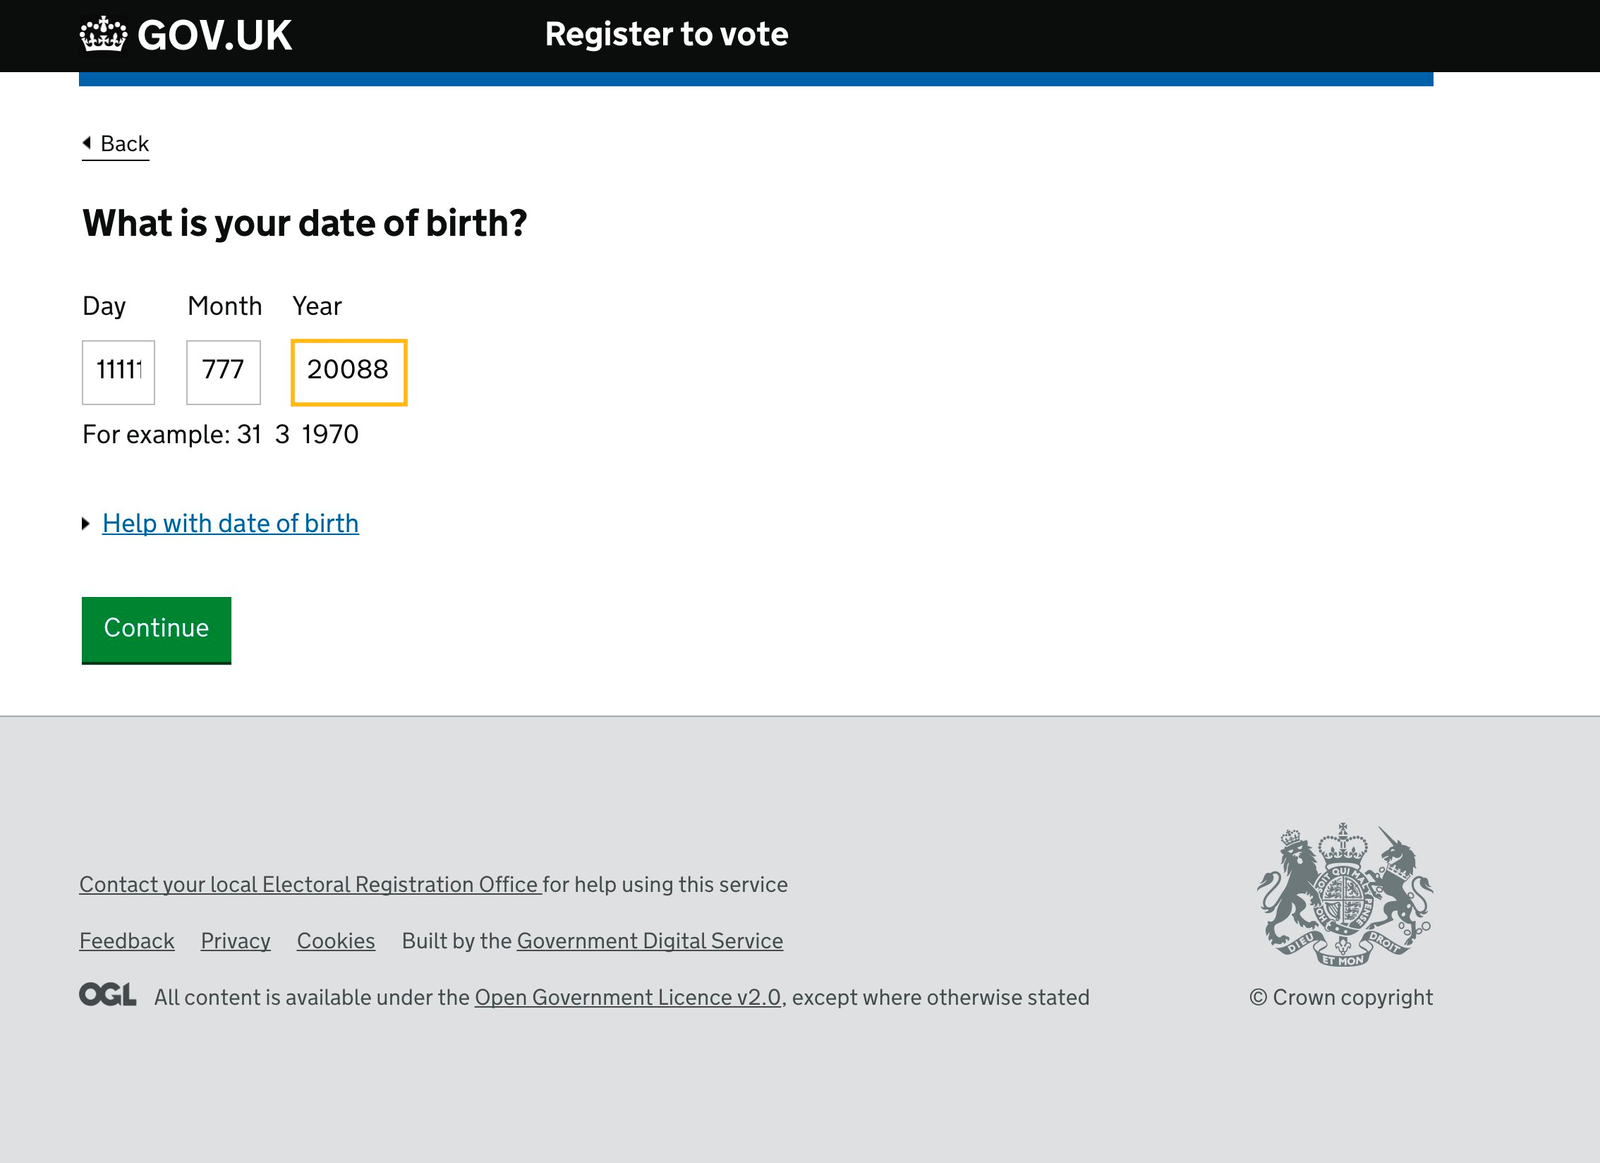 Absence of date of birth validation